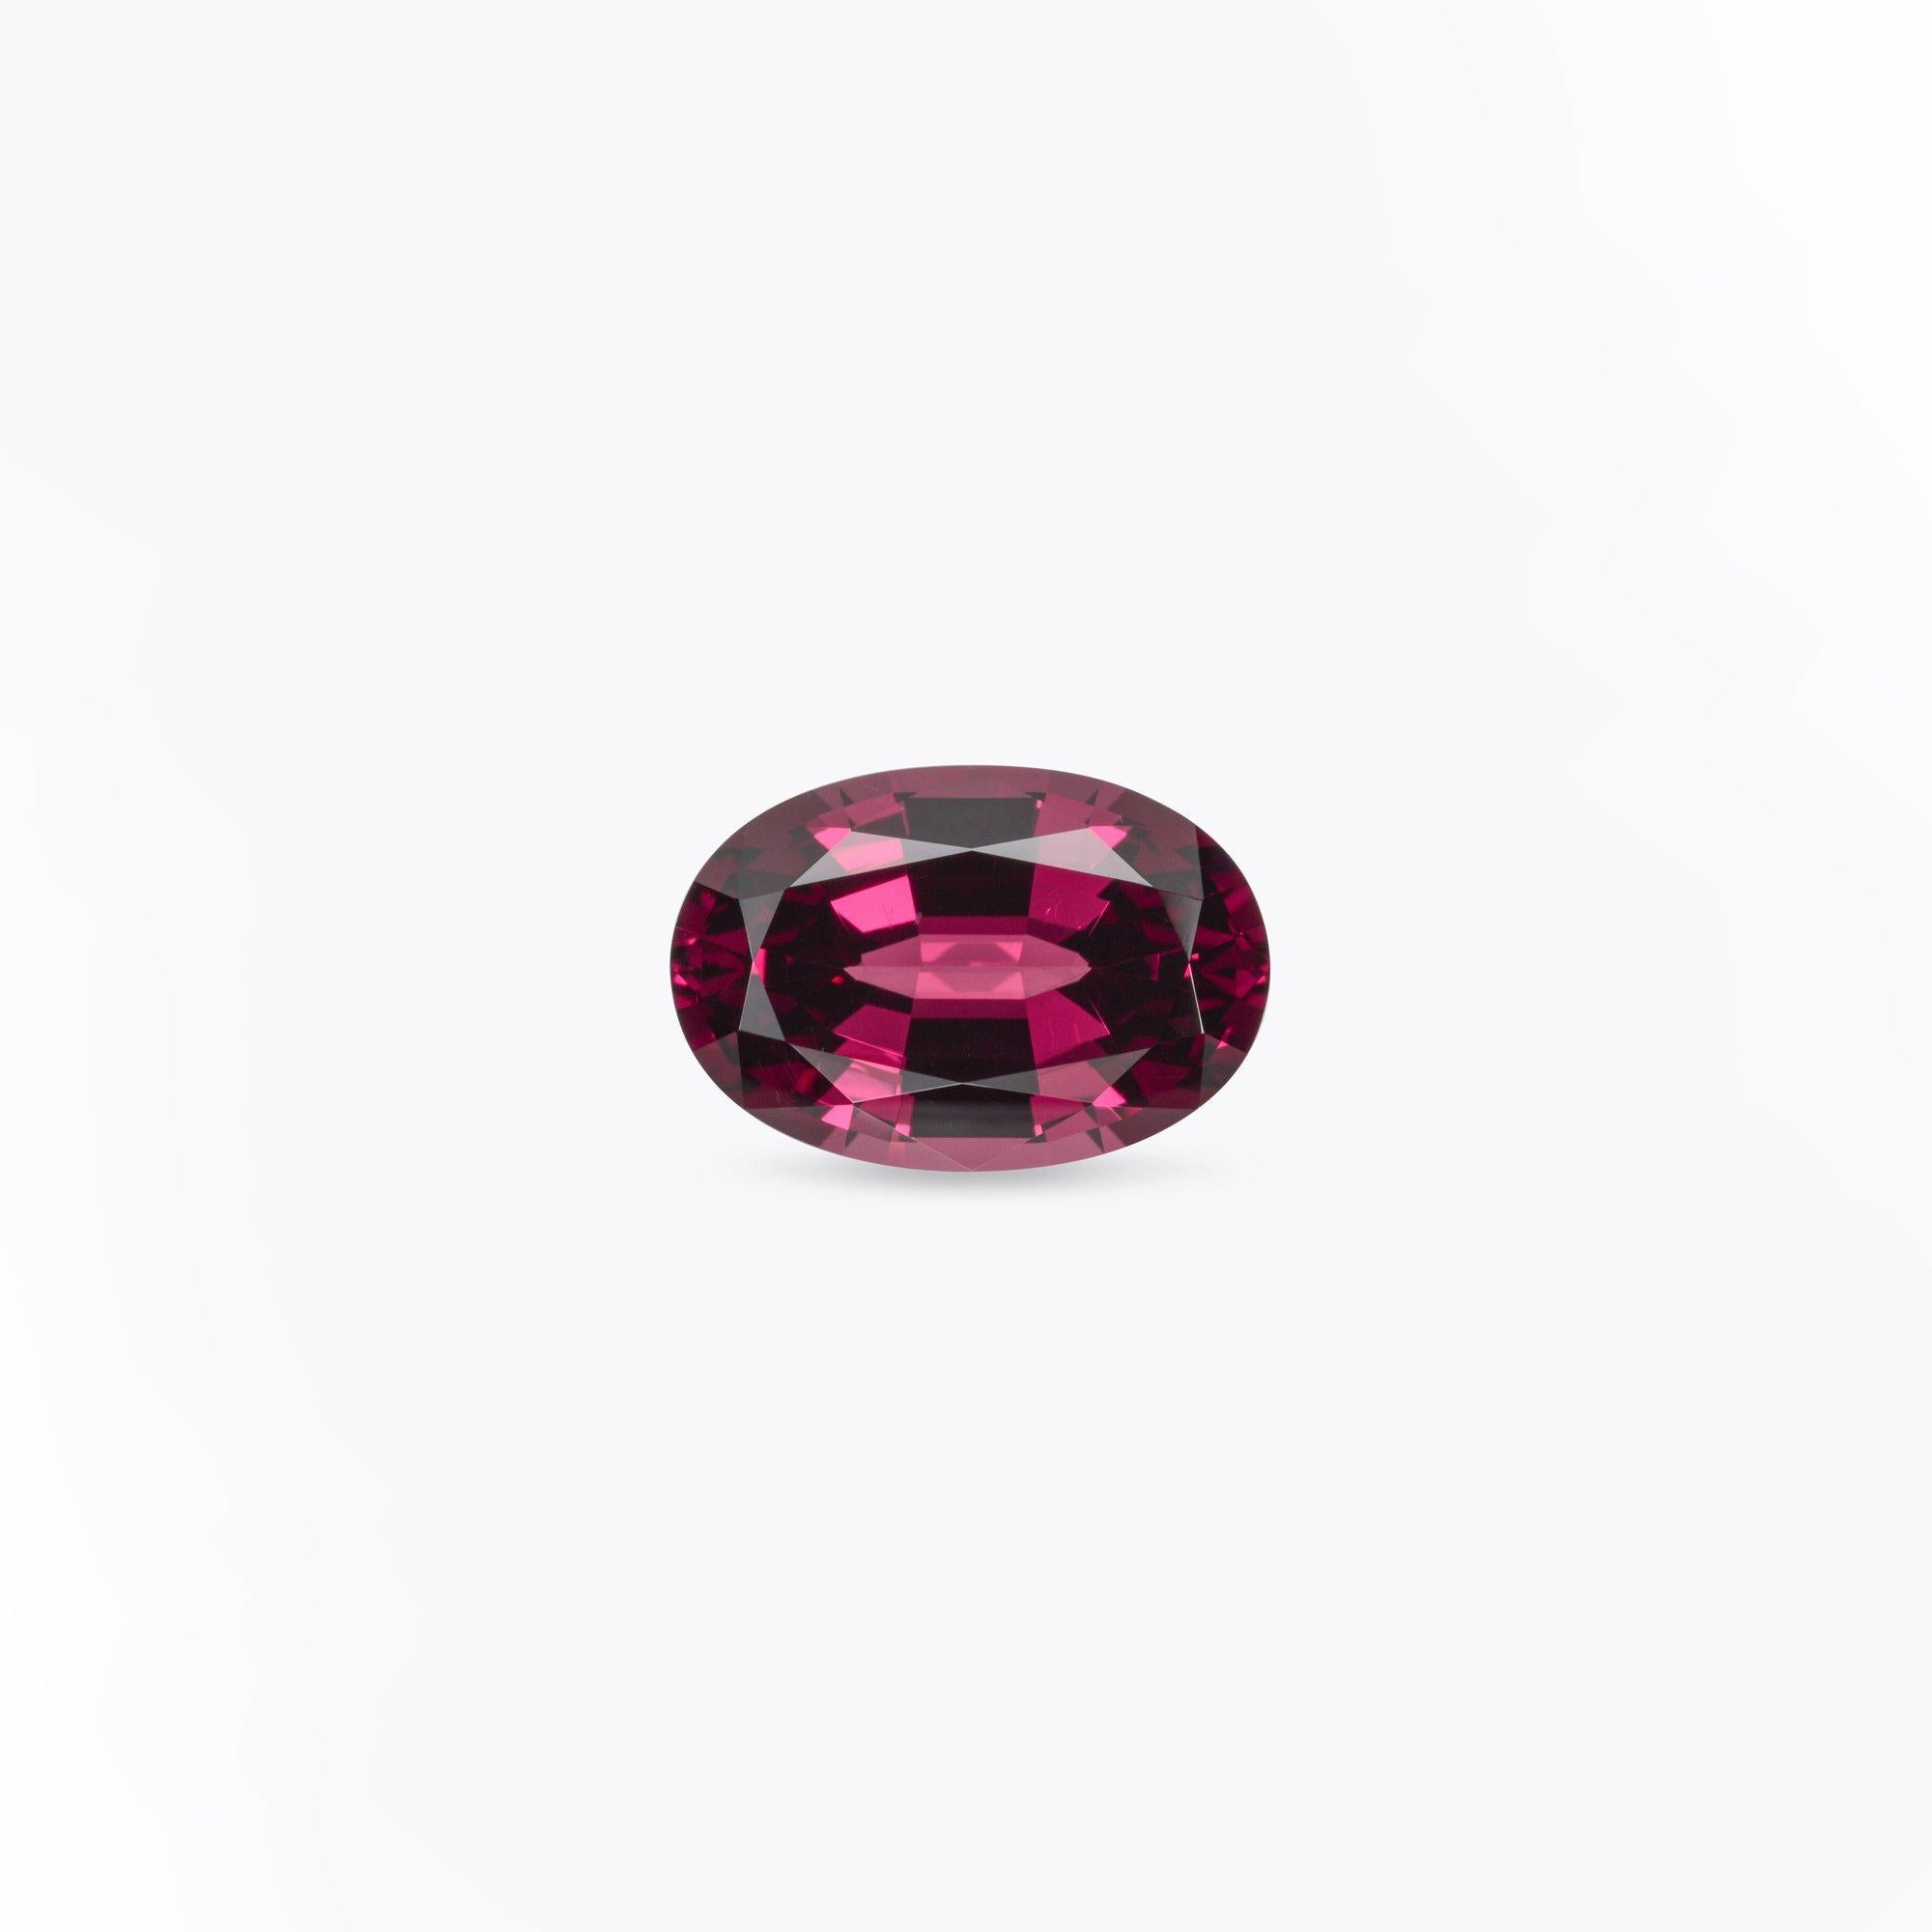 4.11 carat Rhodolite Garnet oval gem offered loose to a lady or gentleman.
Returns are accepted and paid by us within 7 days of delivery.
We offer supreme custom jewelry work upon request. Please contact us for more details.
(Rings, Earrings,